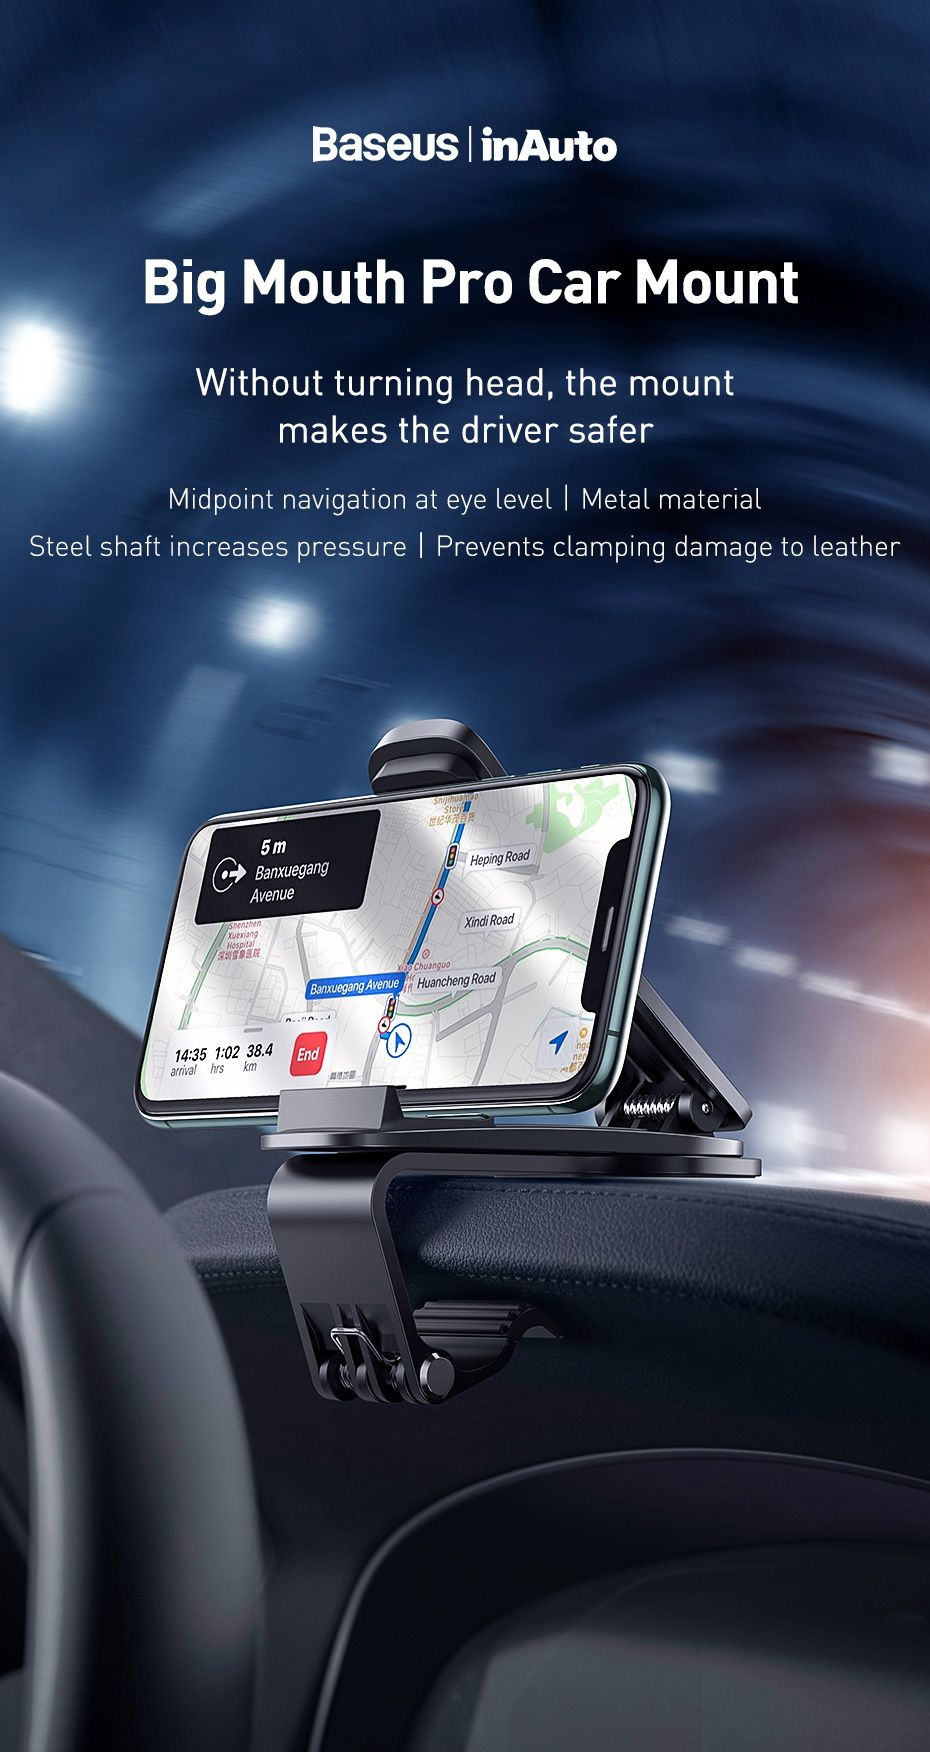 Big Mouth Pro Car Mount Without turning head, the mount makes the driver safer Midpoint navigation at eye level I Metal material Steel shaft increases pressure I Prevents clamping damage to leather